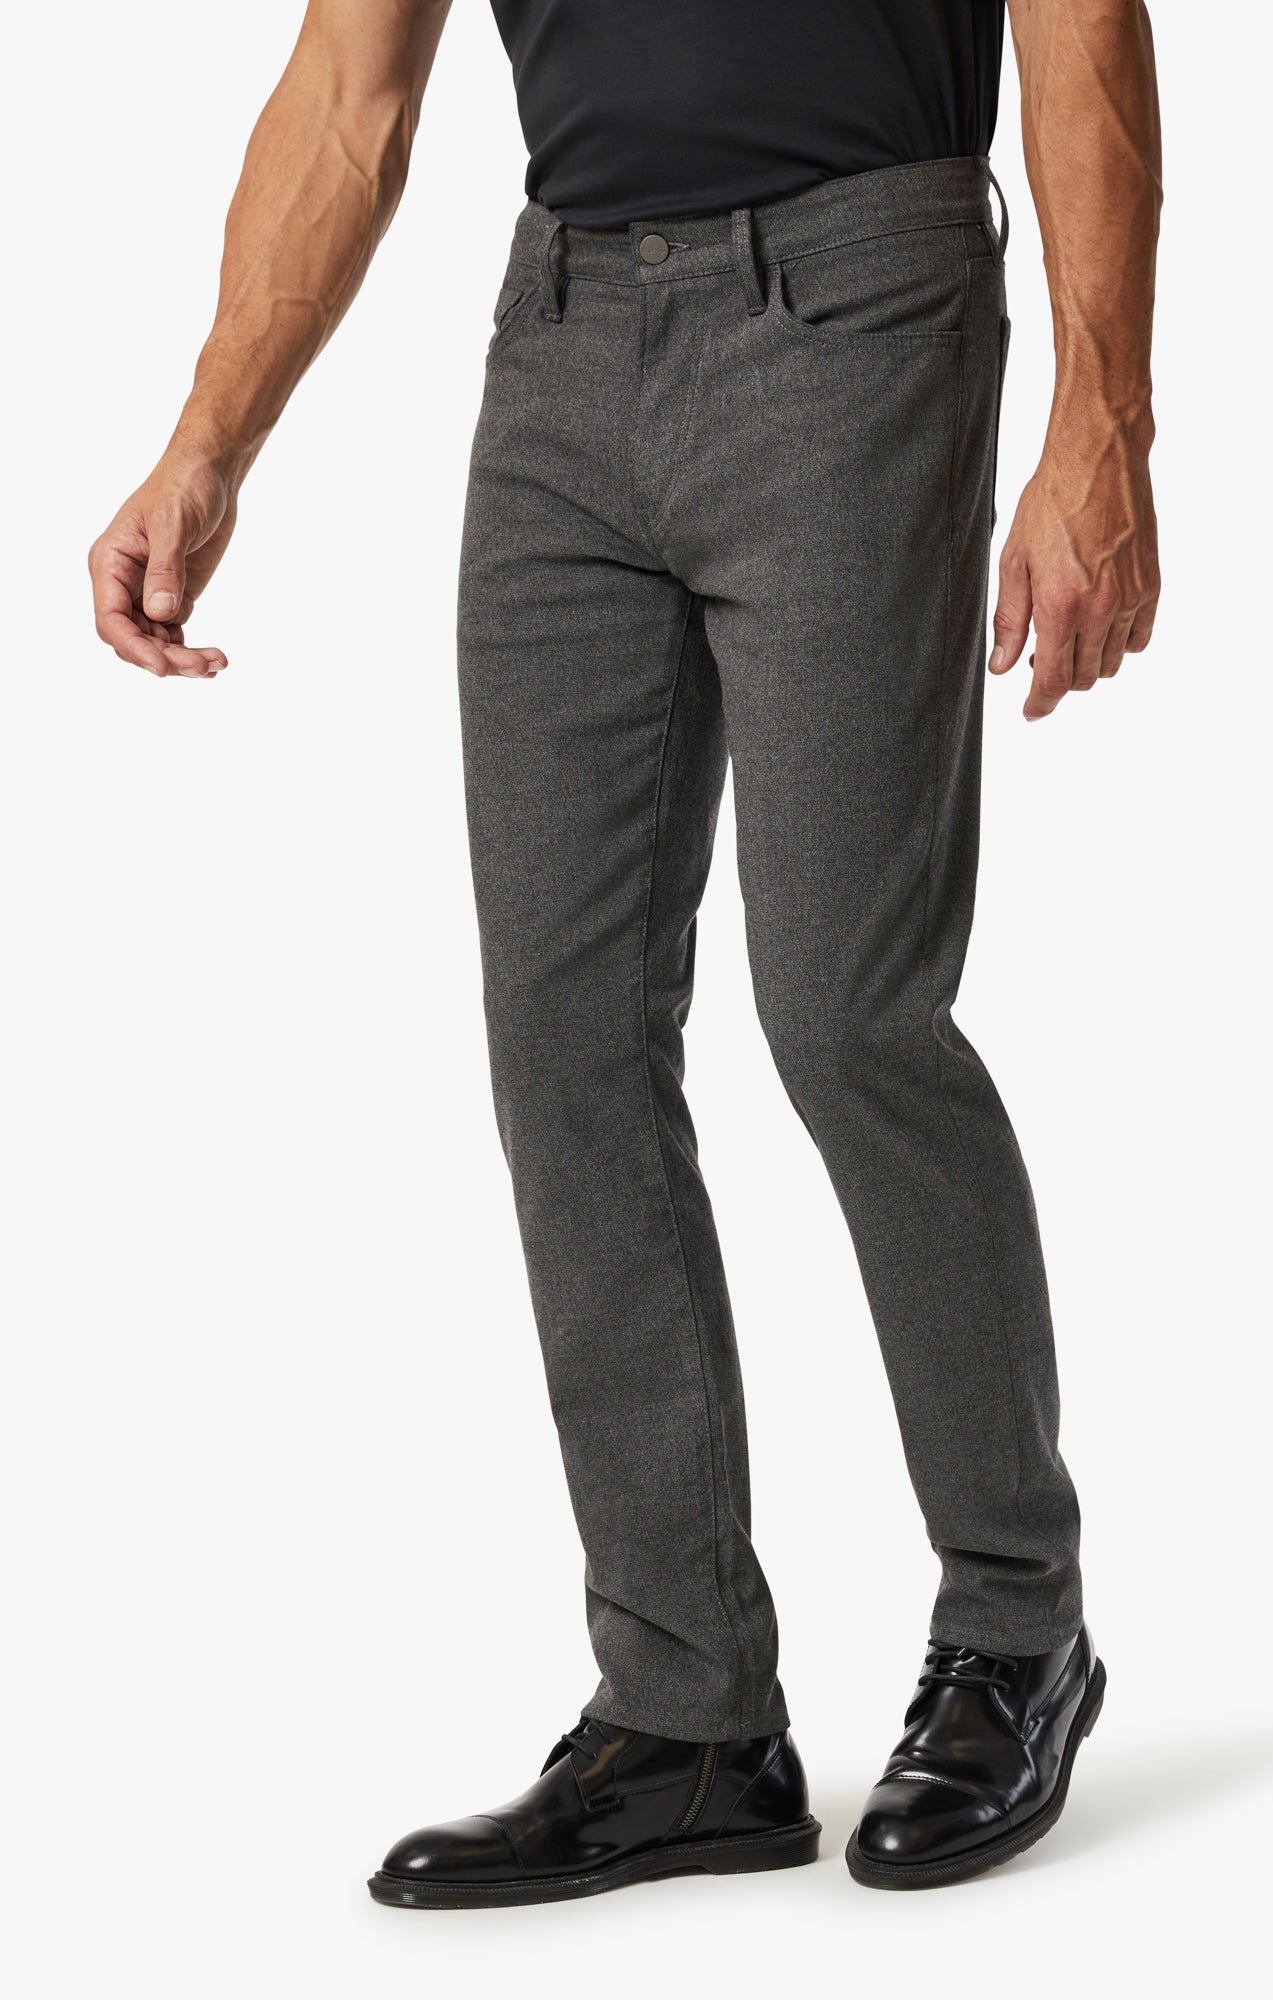 Charisma Relaxed Straight Pants In Grey Elite Image 4